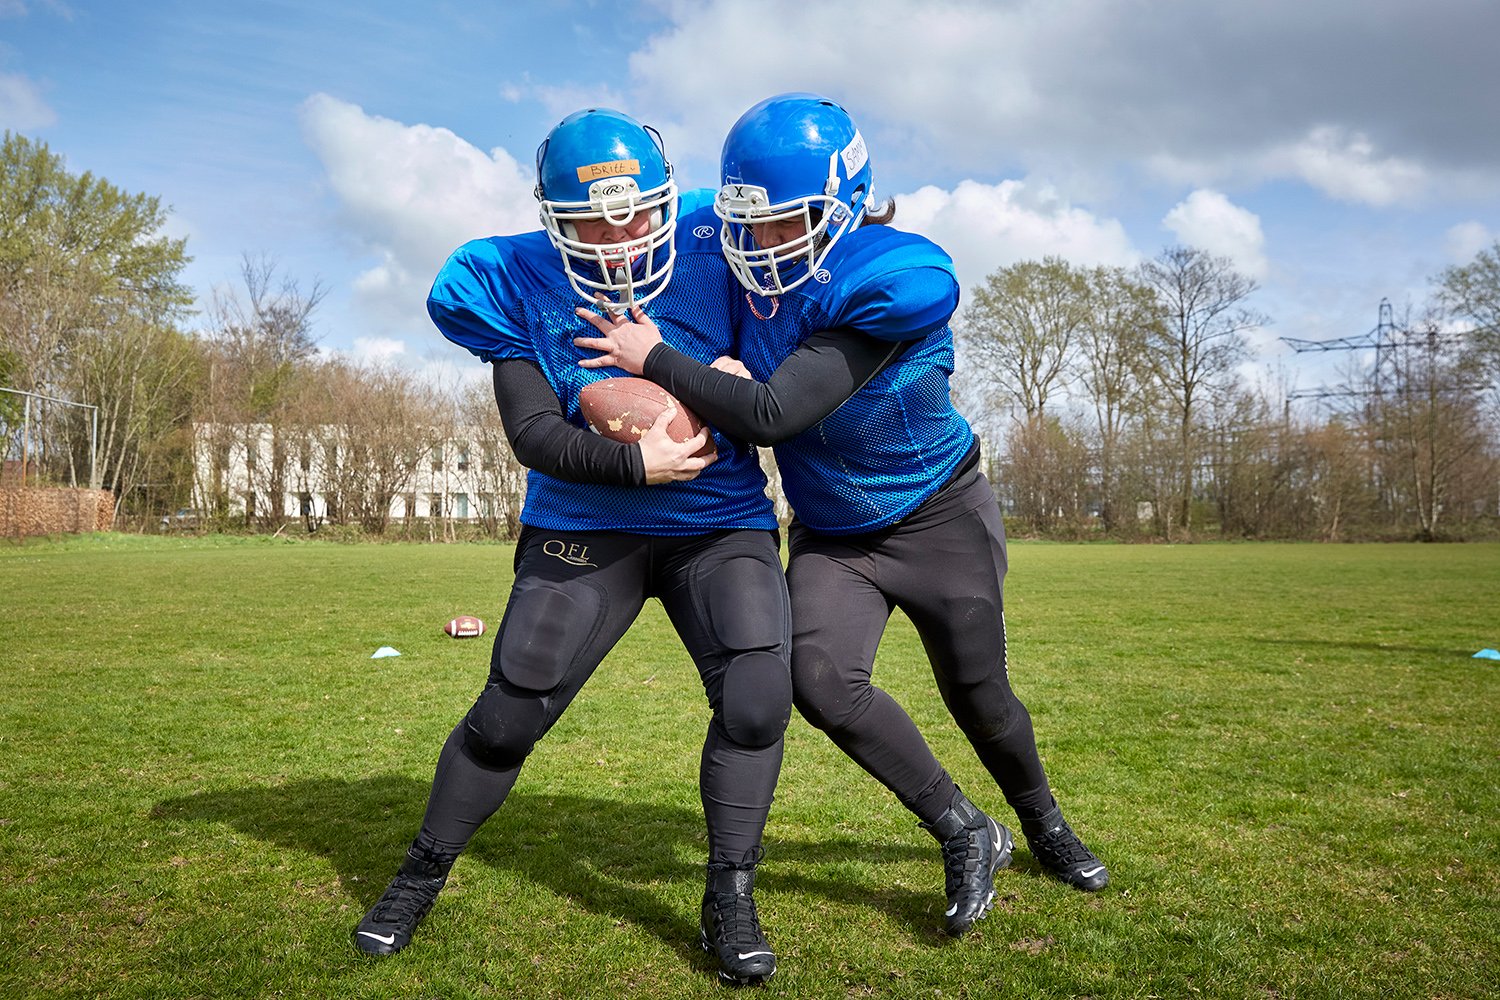  Two Zwolle Blue Jays players practice during a training session, Zwolle, 2021. 